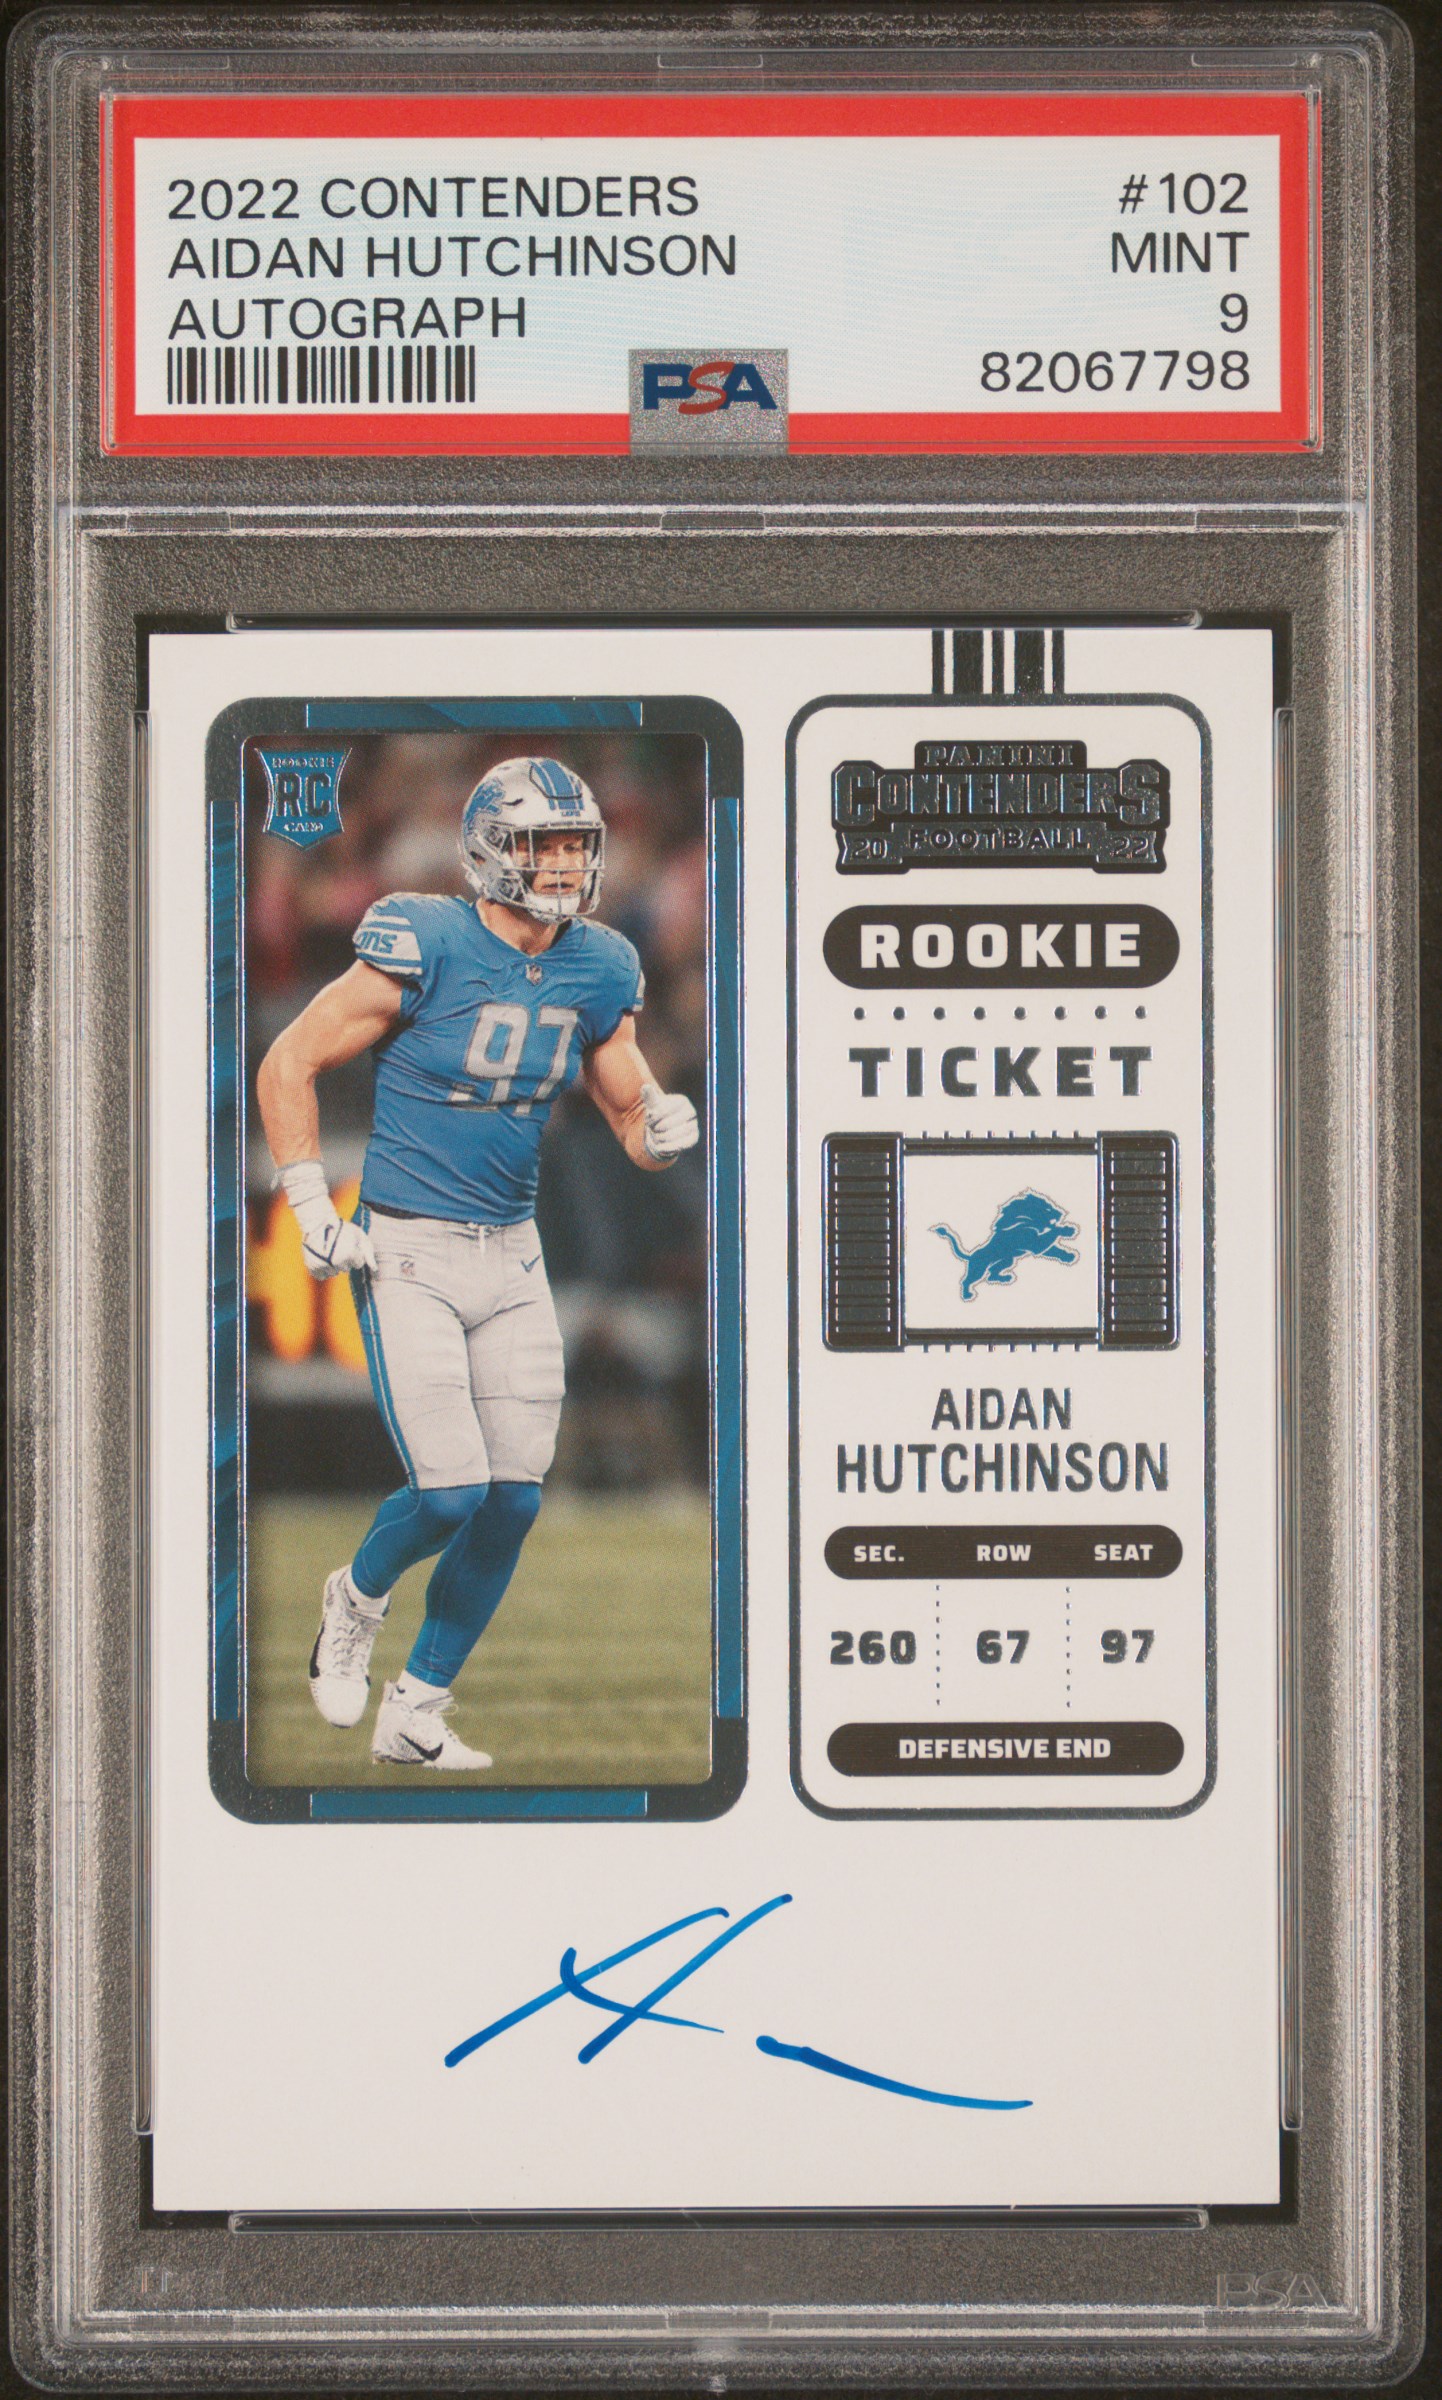 2022 Panini Contenders Autograph Rookie Ticket #102 Aidan Hutchinson Signed Rookie Card – PSA MINT 9